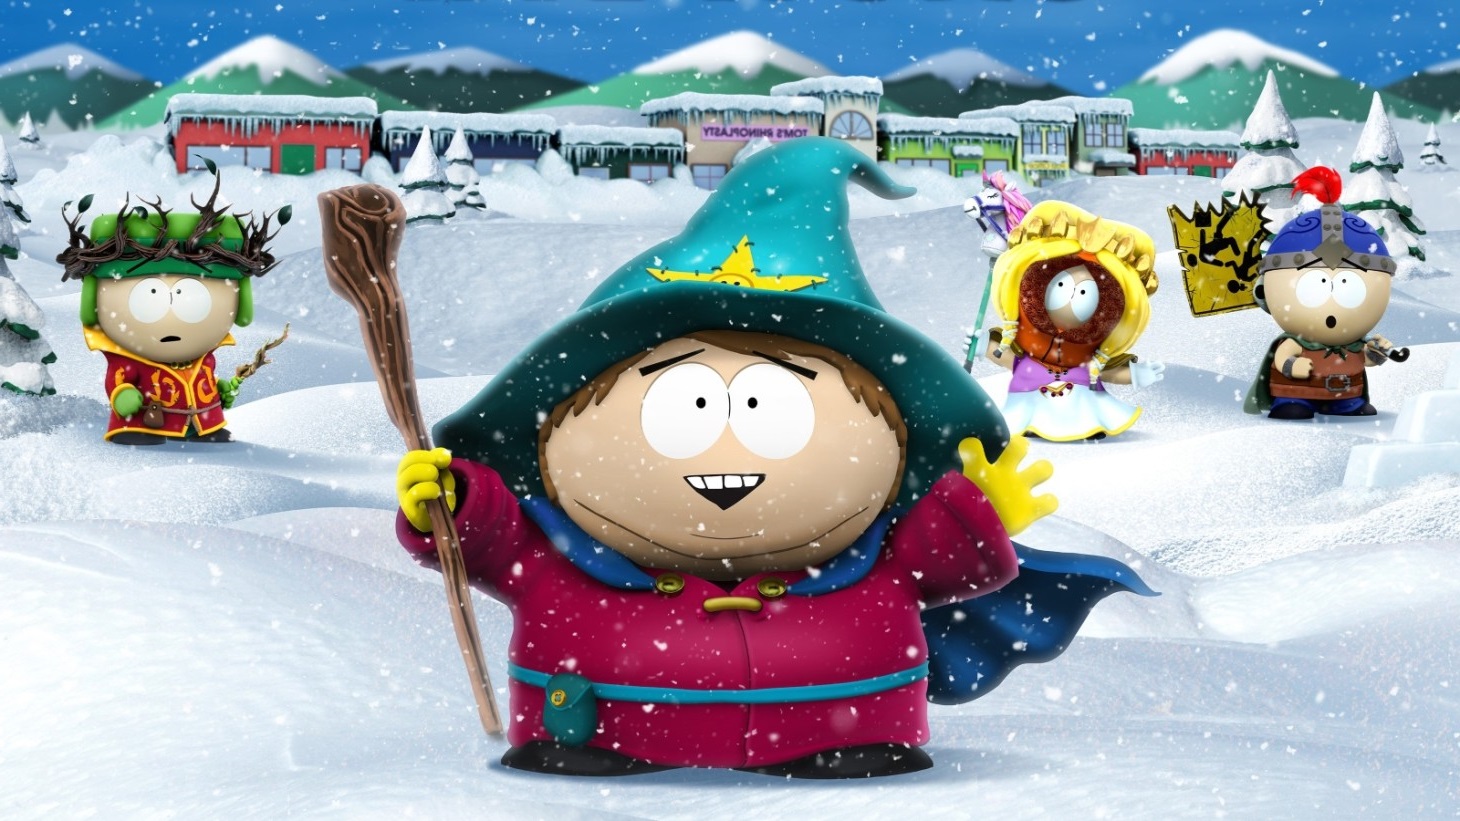 SOUTH PARK: SNOW DAY! PC Game Full Version Download